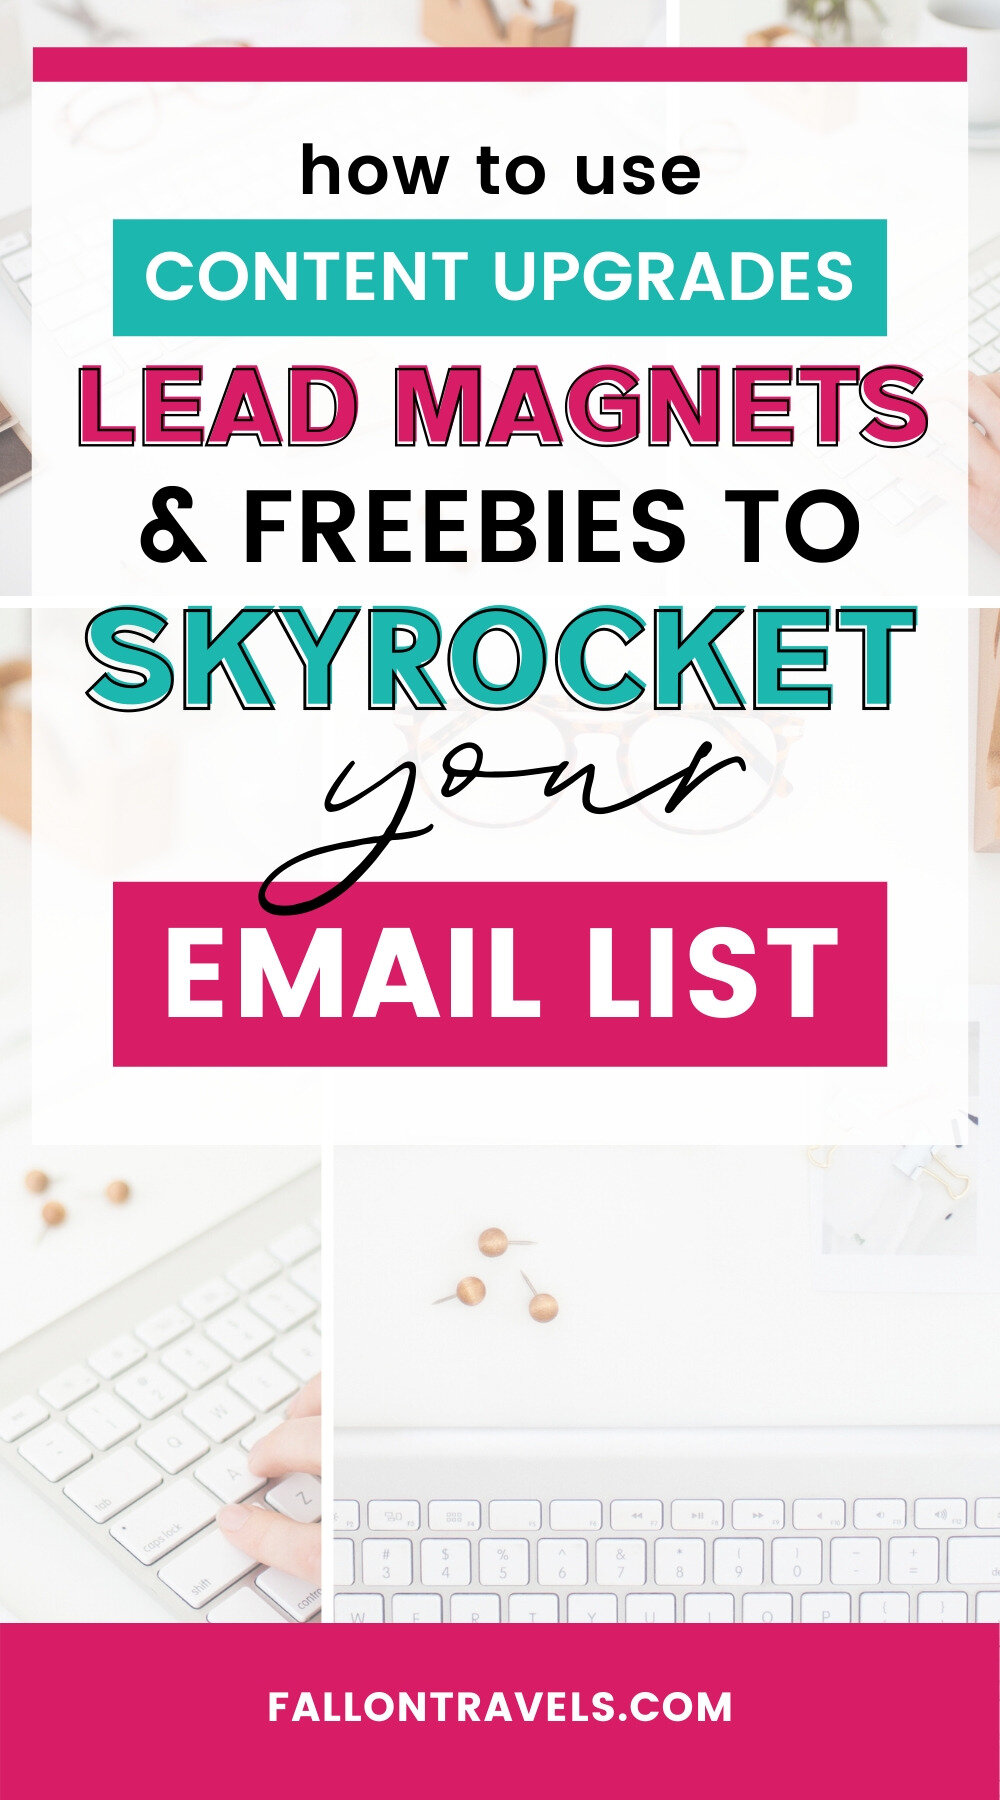 How to grow your email list with Content Upgrades (Opt in freebies)